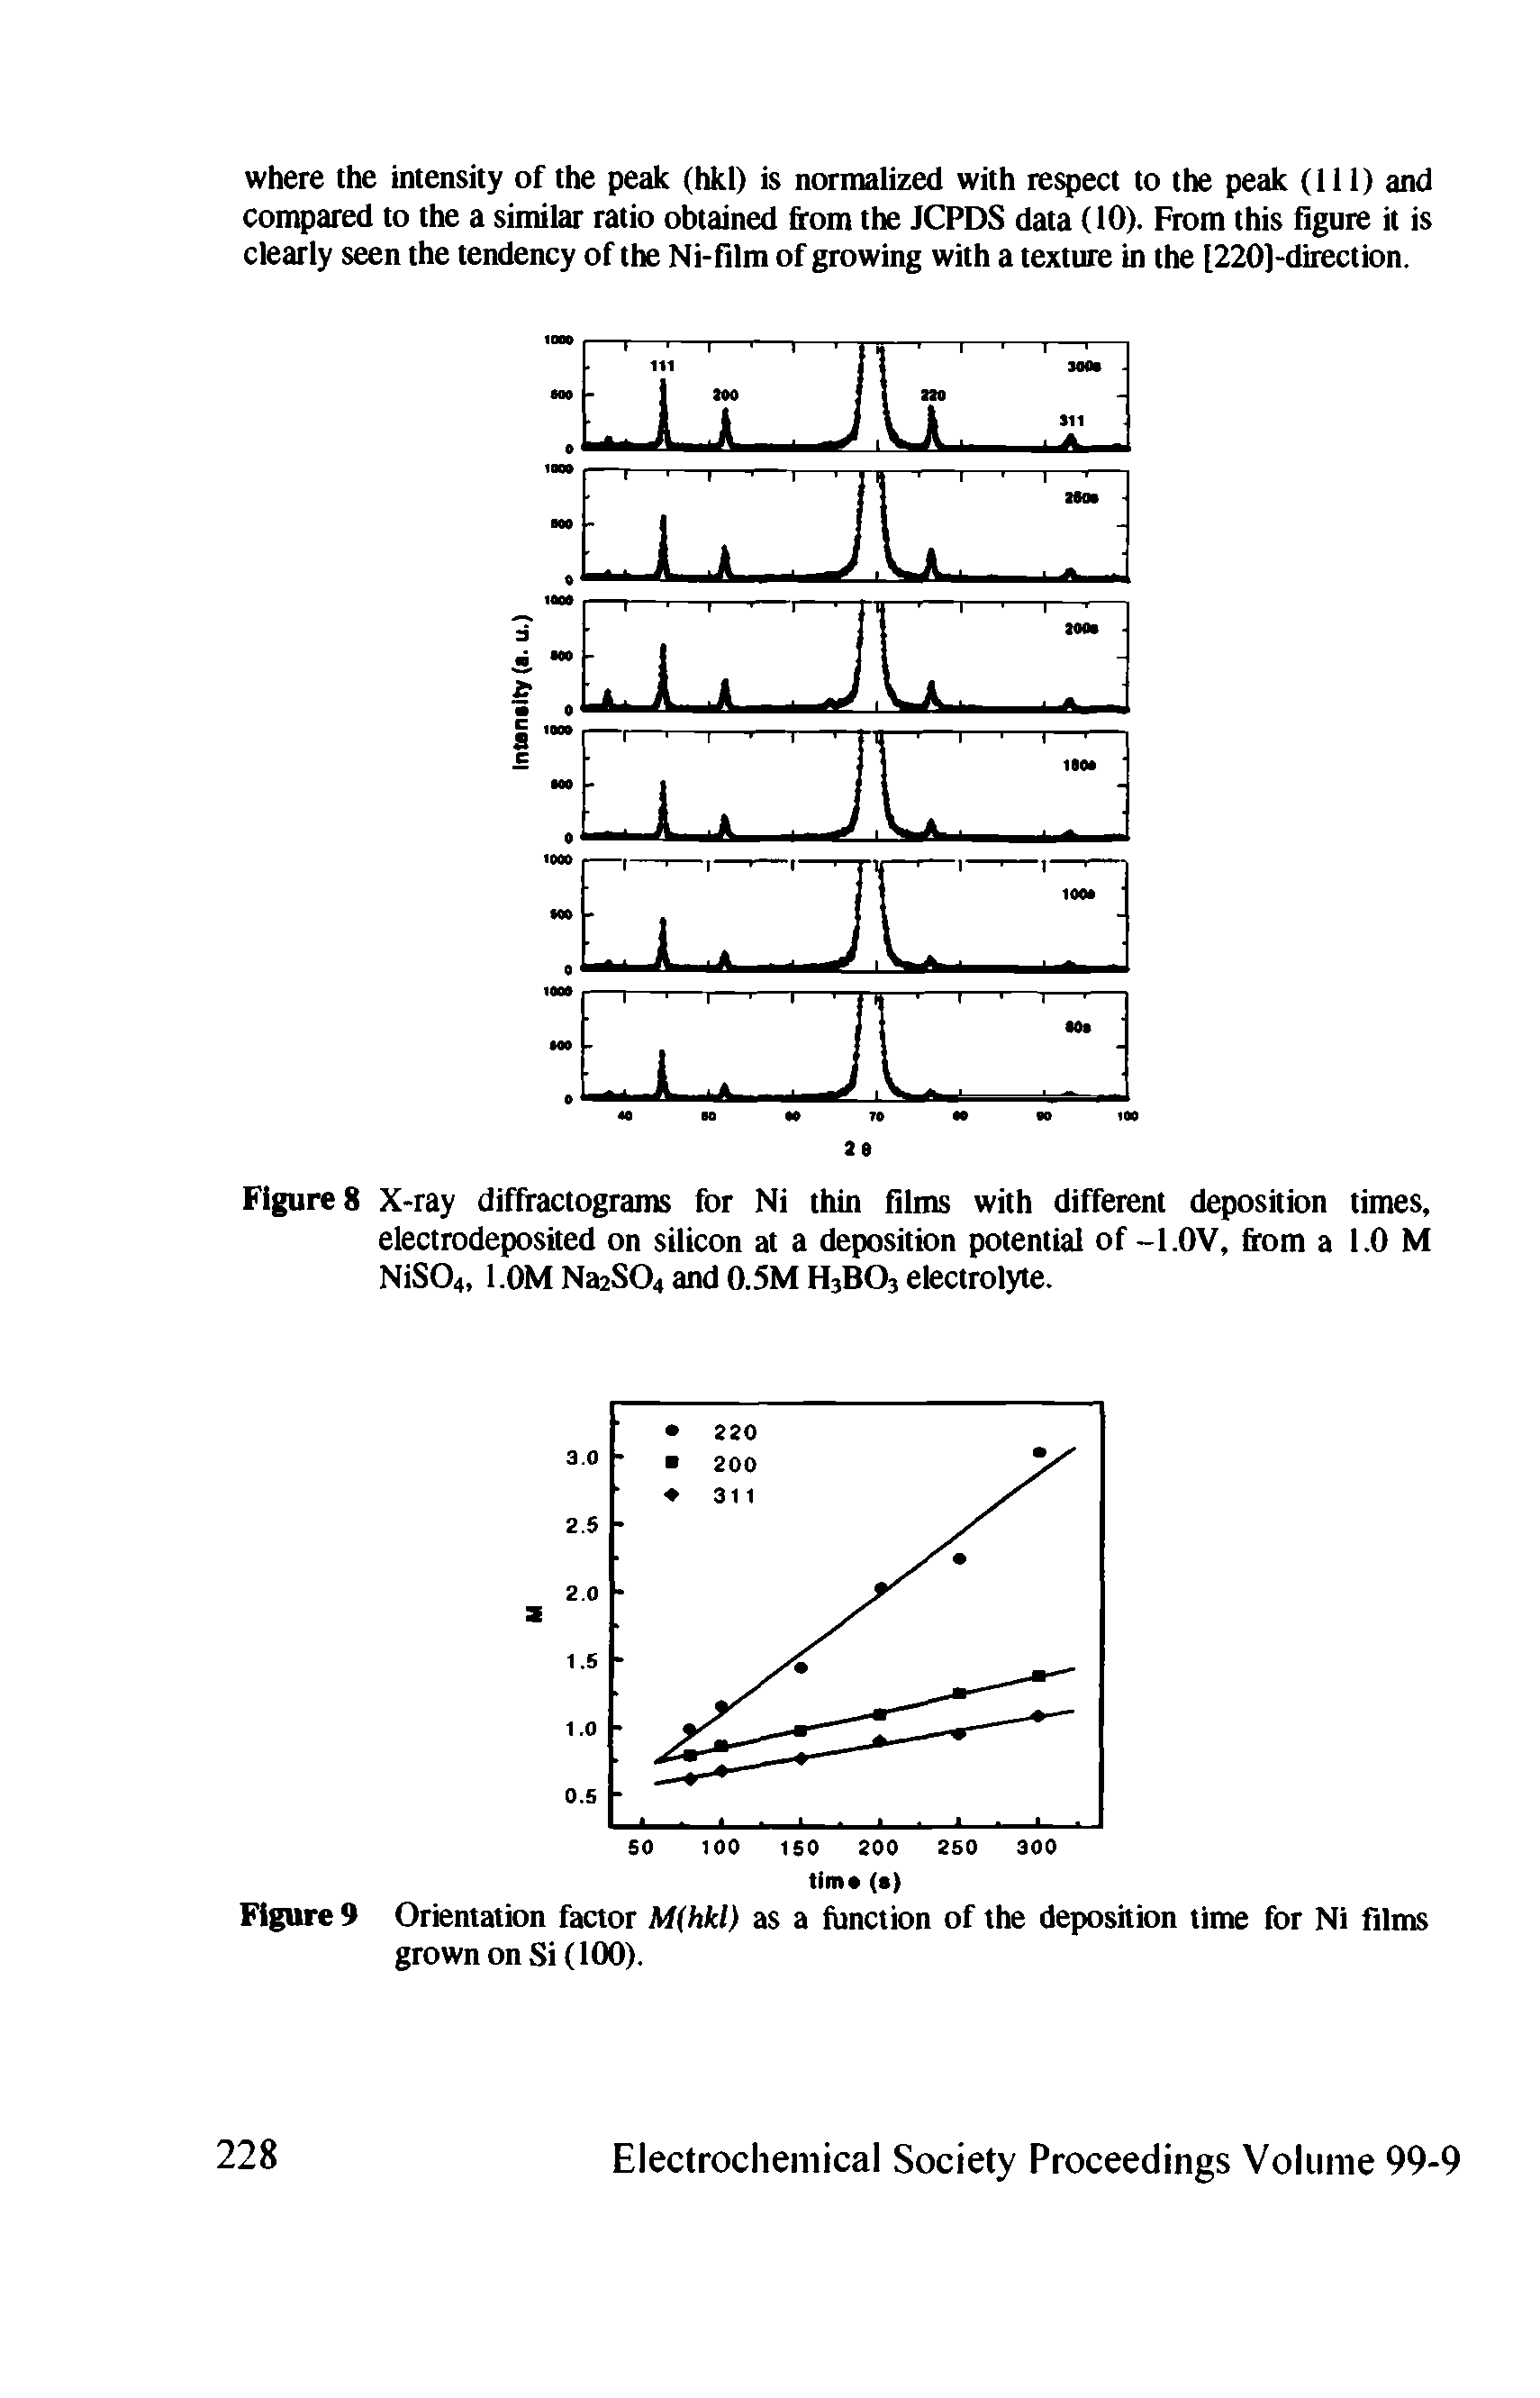 Figure 8 X-ray difffactograms for Ni thin films with different deposition times, electrodeposited on silicon at a deposition potential of -1.0V, from a l.O M NiS04, 1.0M Na2S04 and 0.5M H3B03 electrolyte.